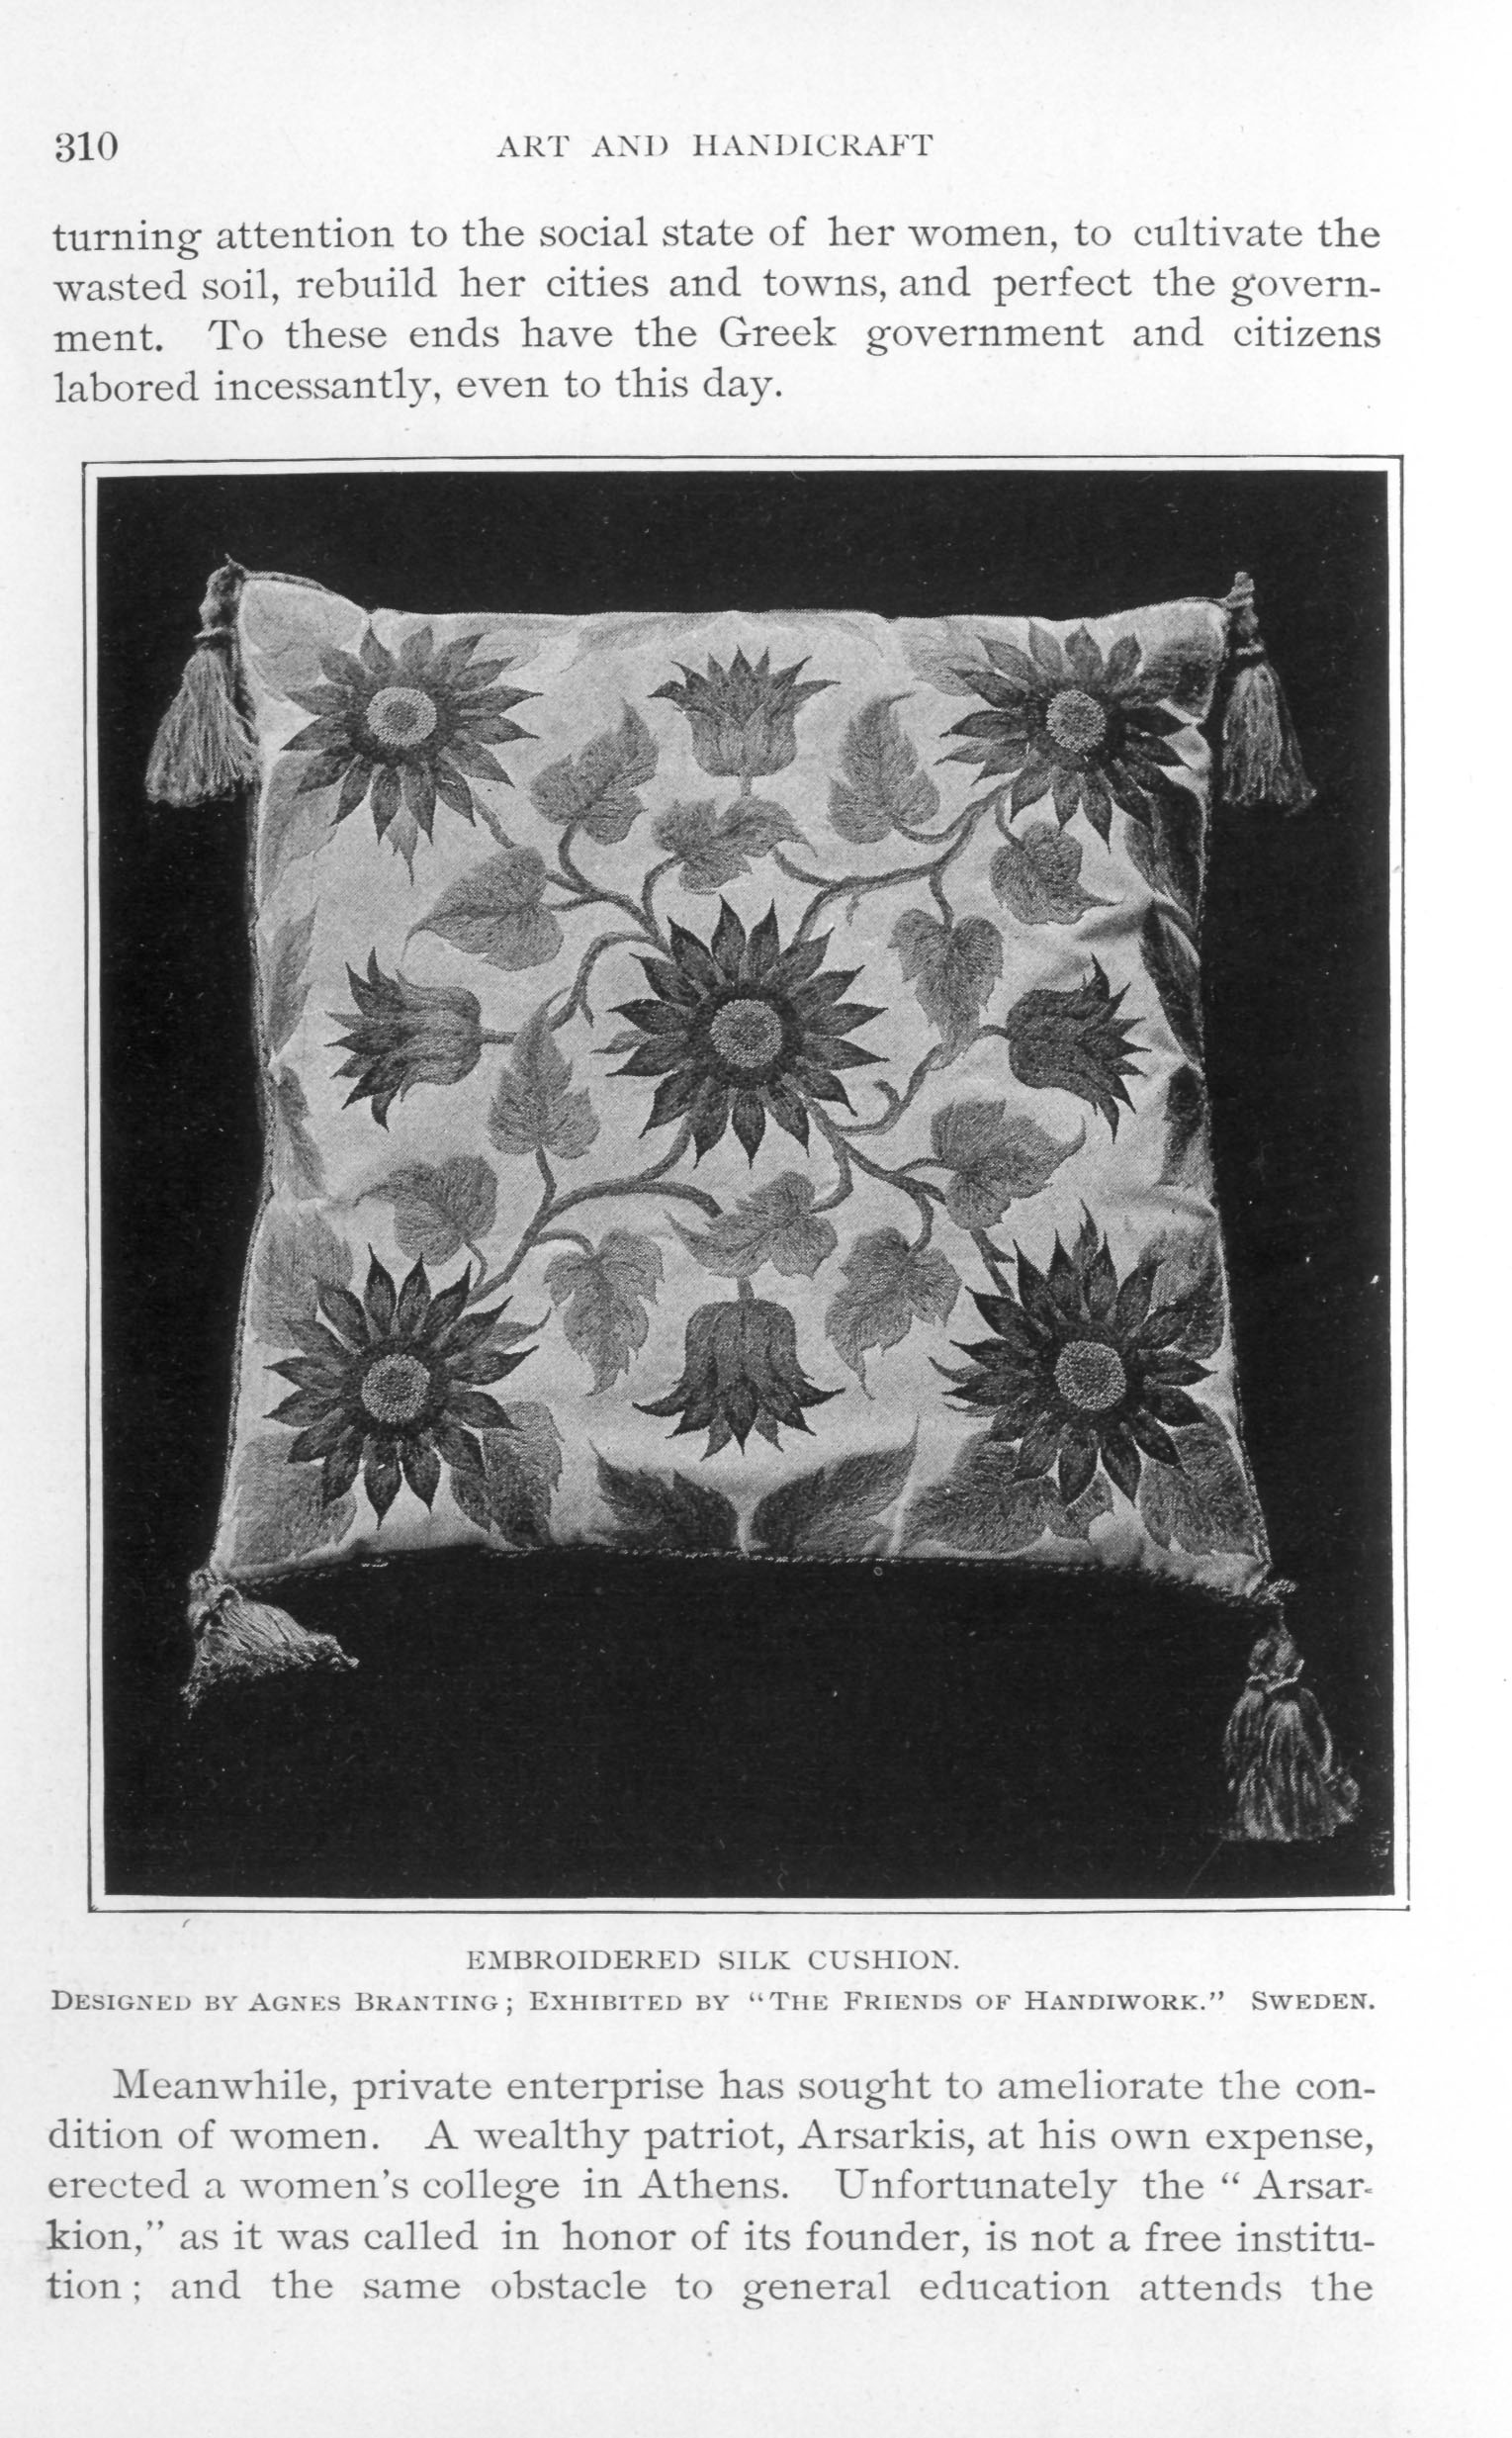 cushion decorated with floral embroidery and tassels